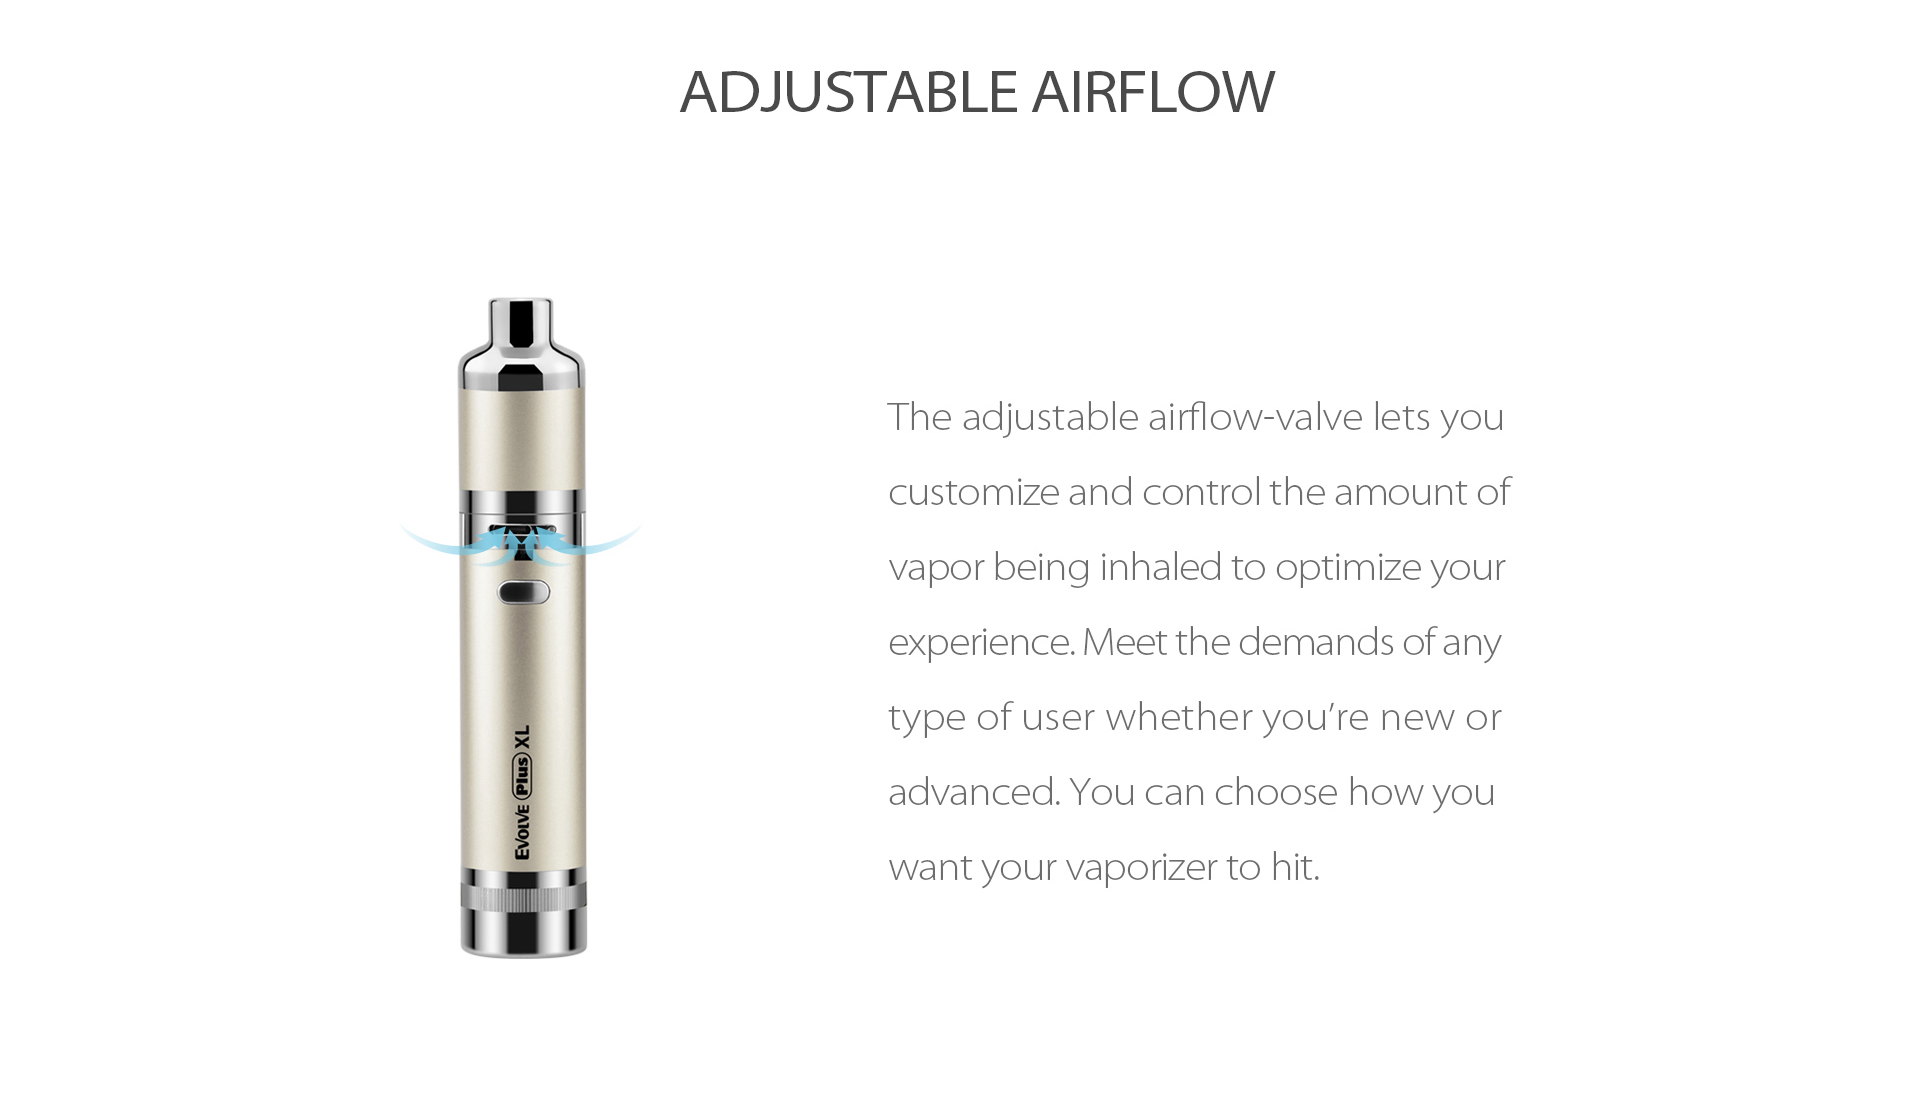 Yocan Evolve Plus XL Vaporizer 2020 version features adjustable airflow-valve lets you customize and control the amount of vapor being inhaled to optimize your experience.